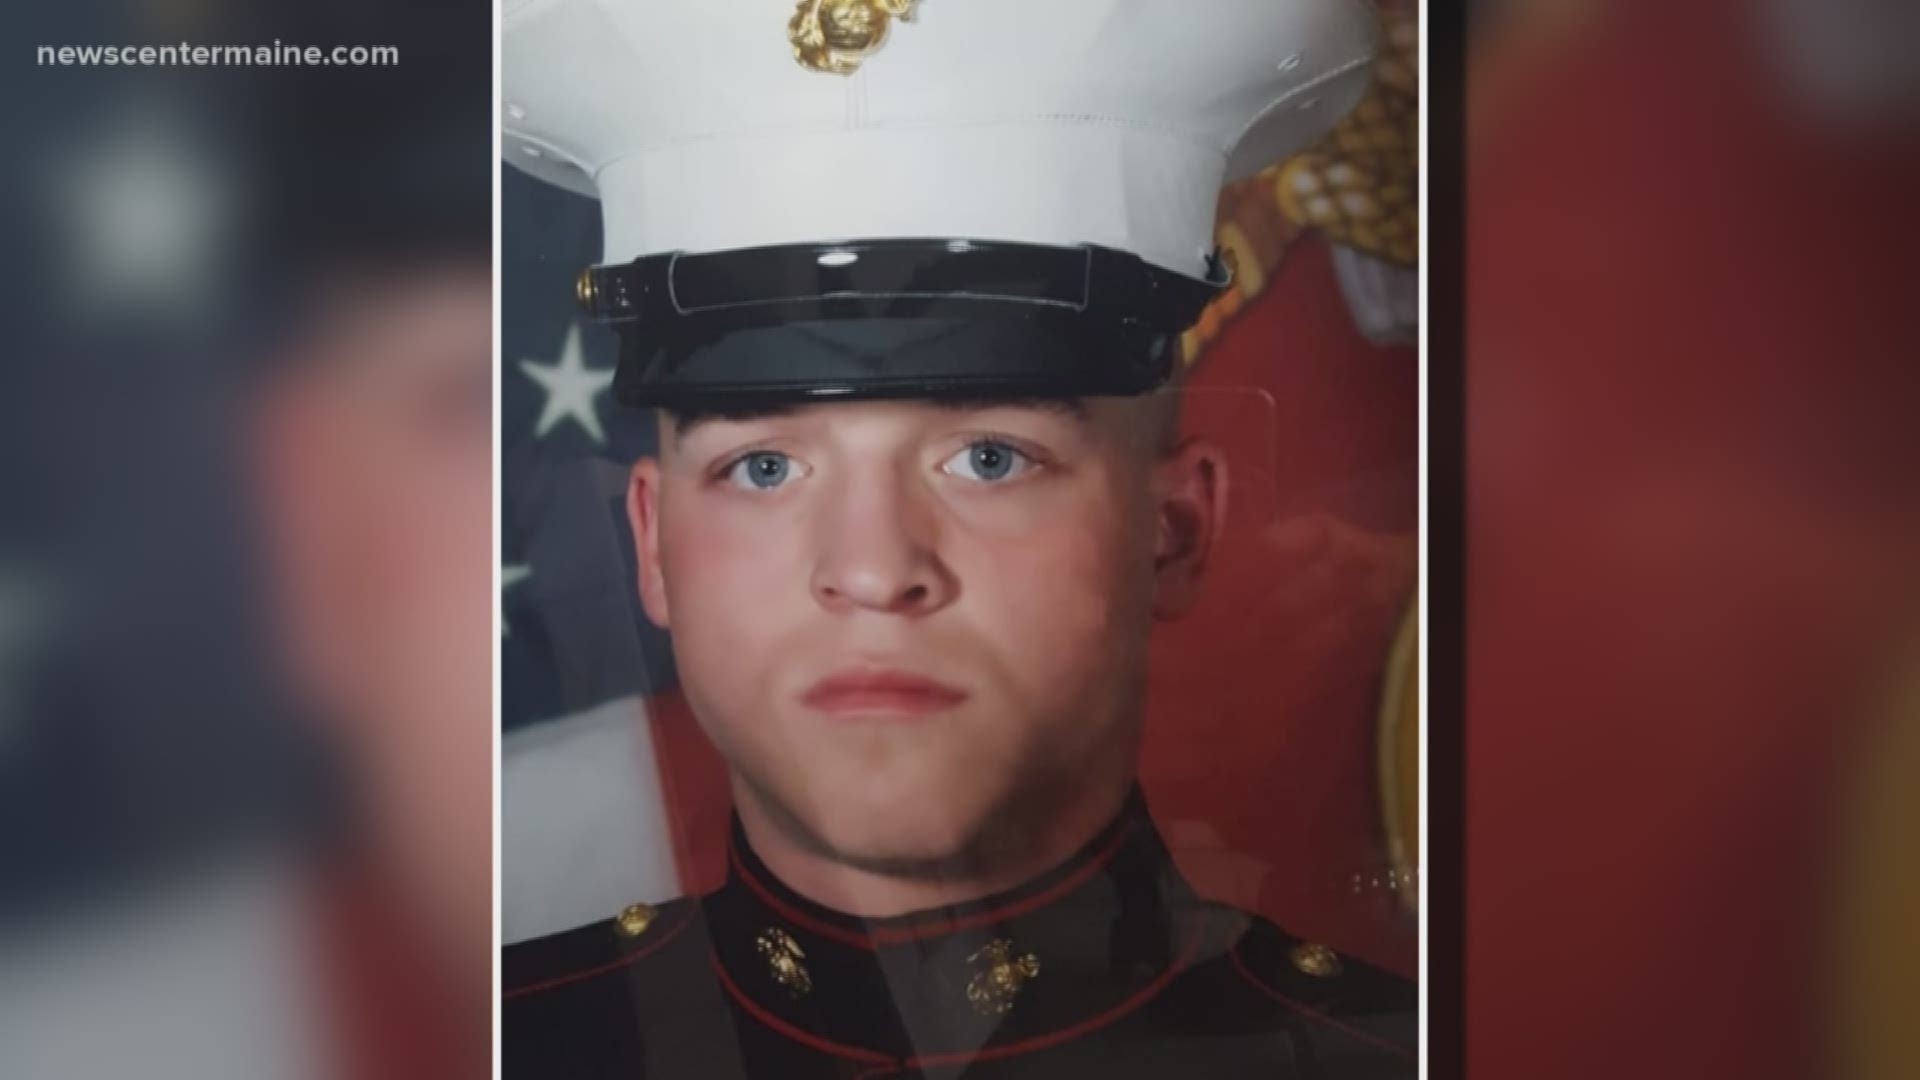 Maine marine Tyler Wallingford, 21, was killed by a fellow Marine at his station in South Carolina on Friday night.